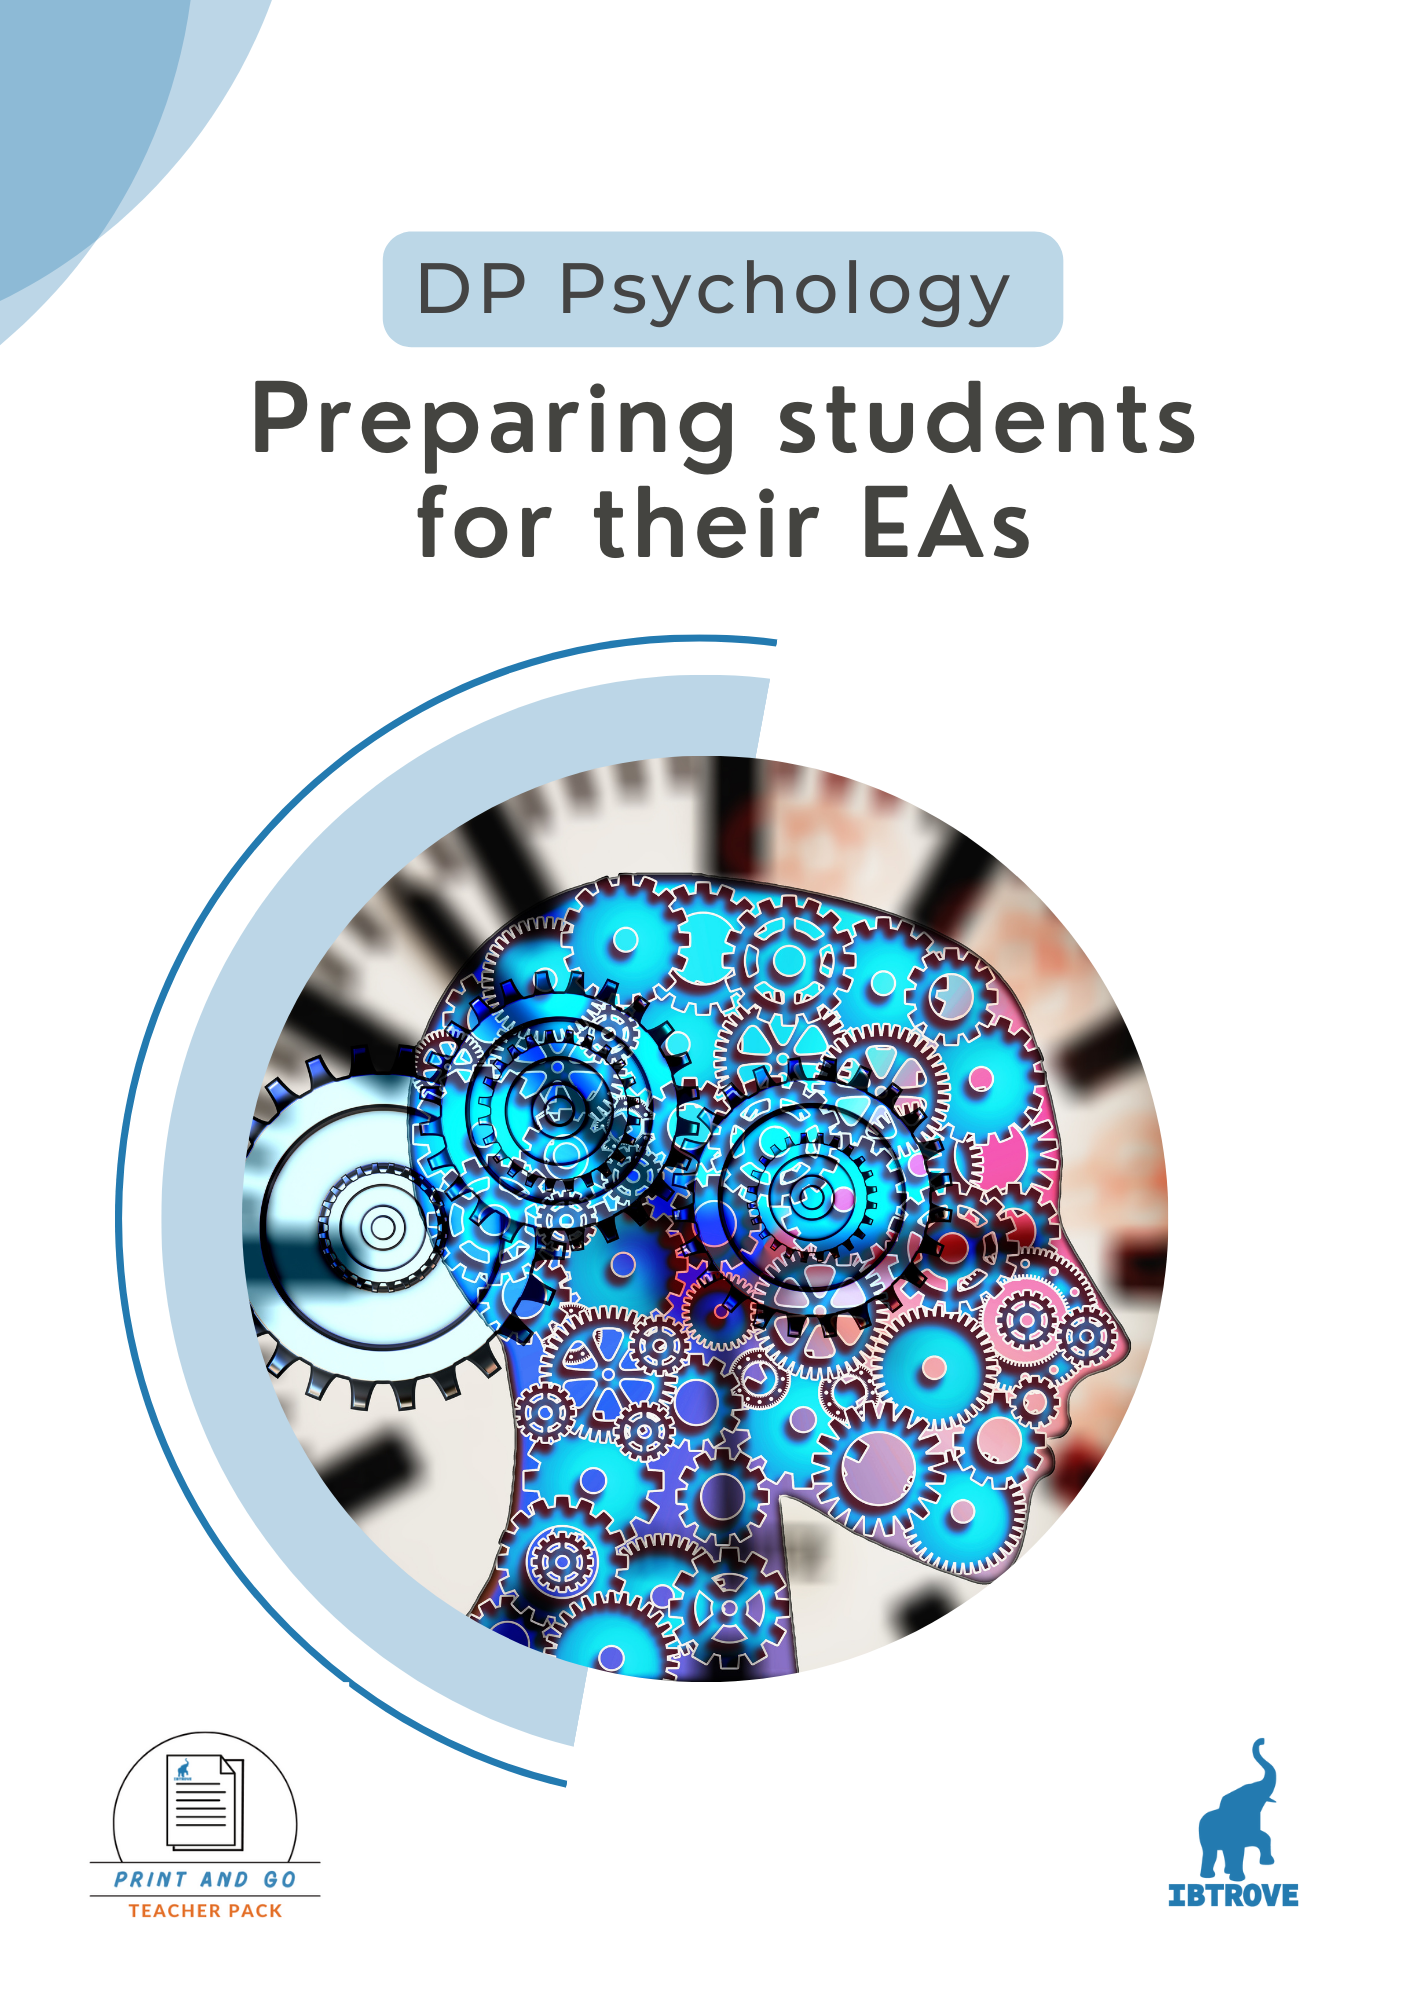 Preparing students for their EAs in DP Psychology (Print and Go Pack)